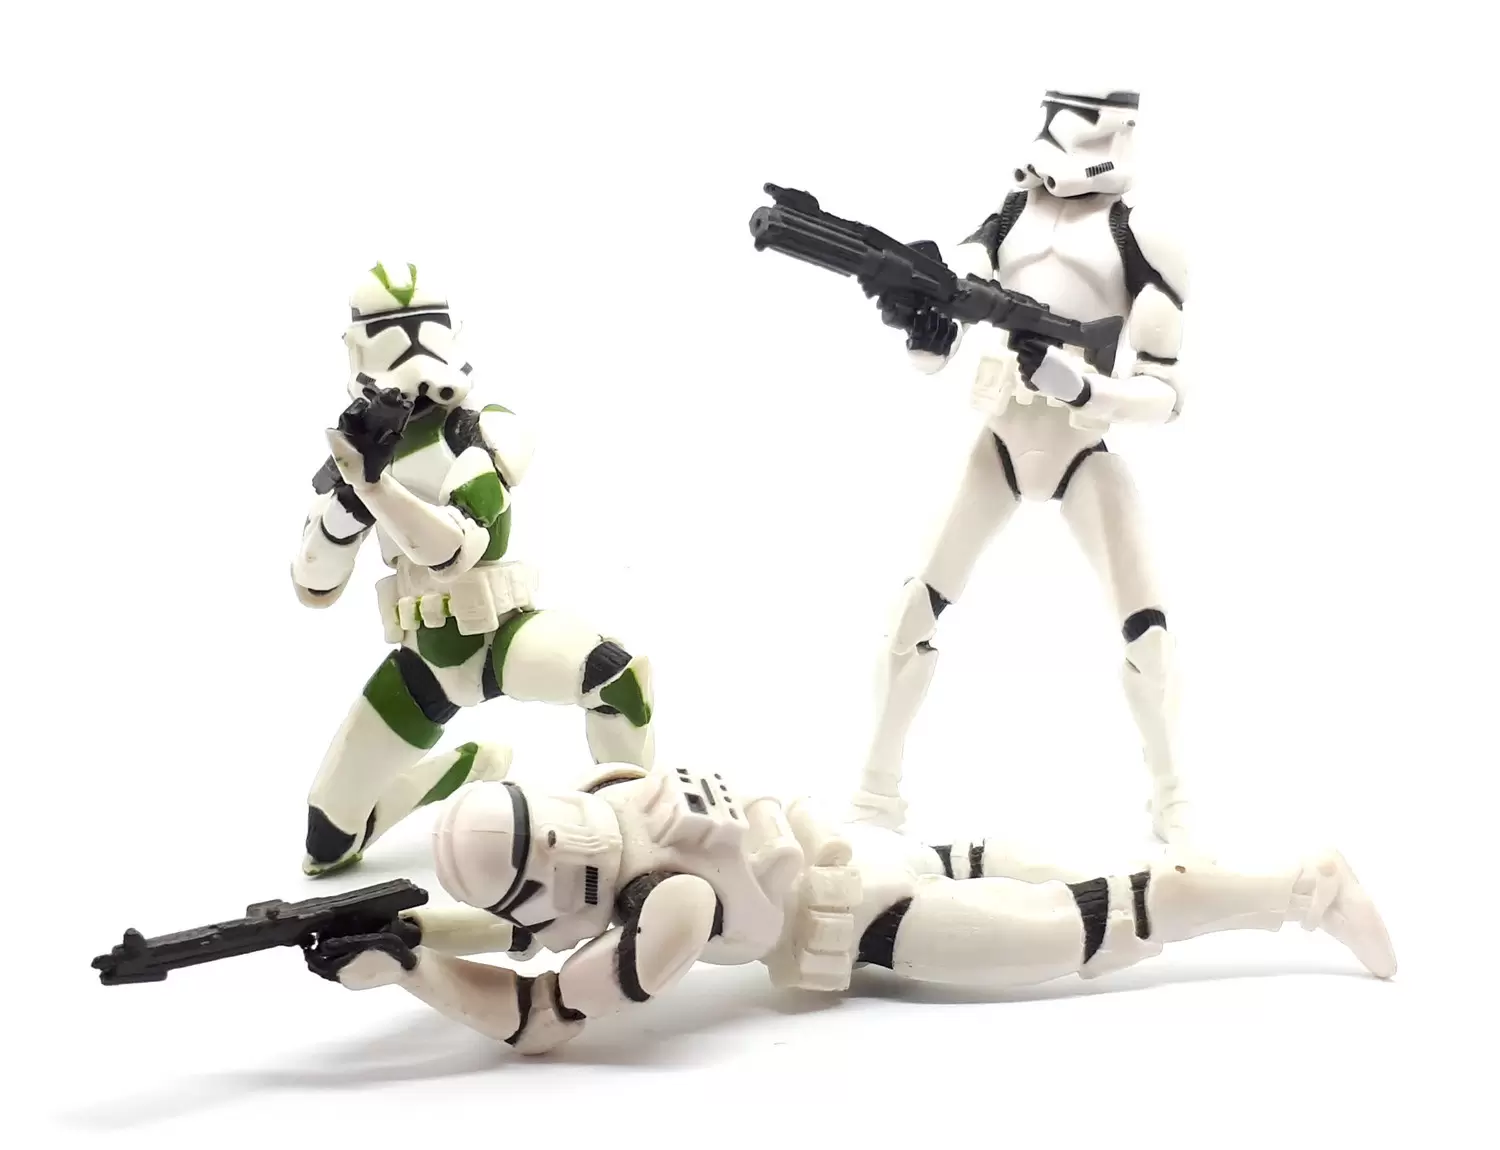 Revenge of the Sith - Clone Trooper Army with Clone Sergeant (Green)